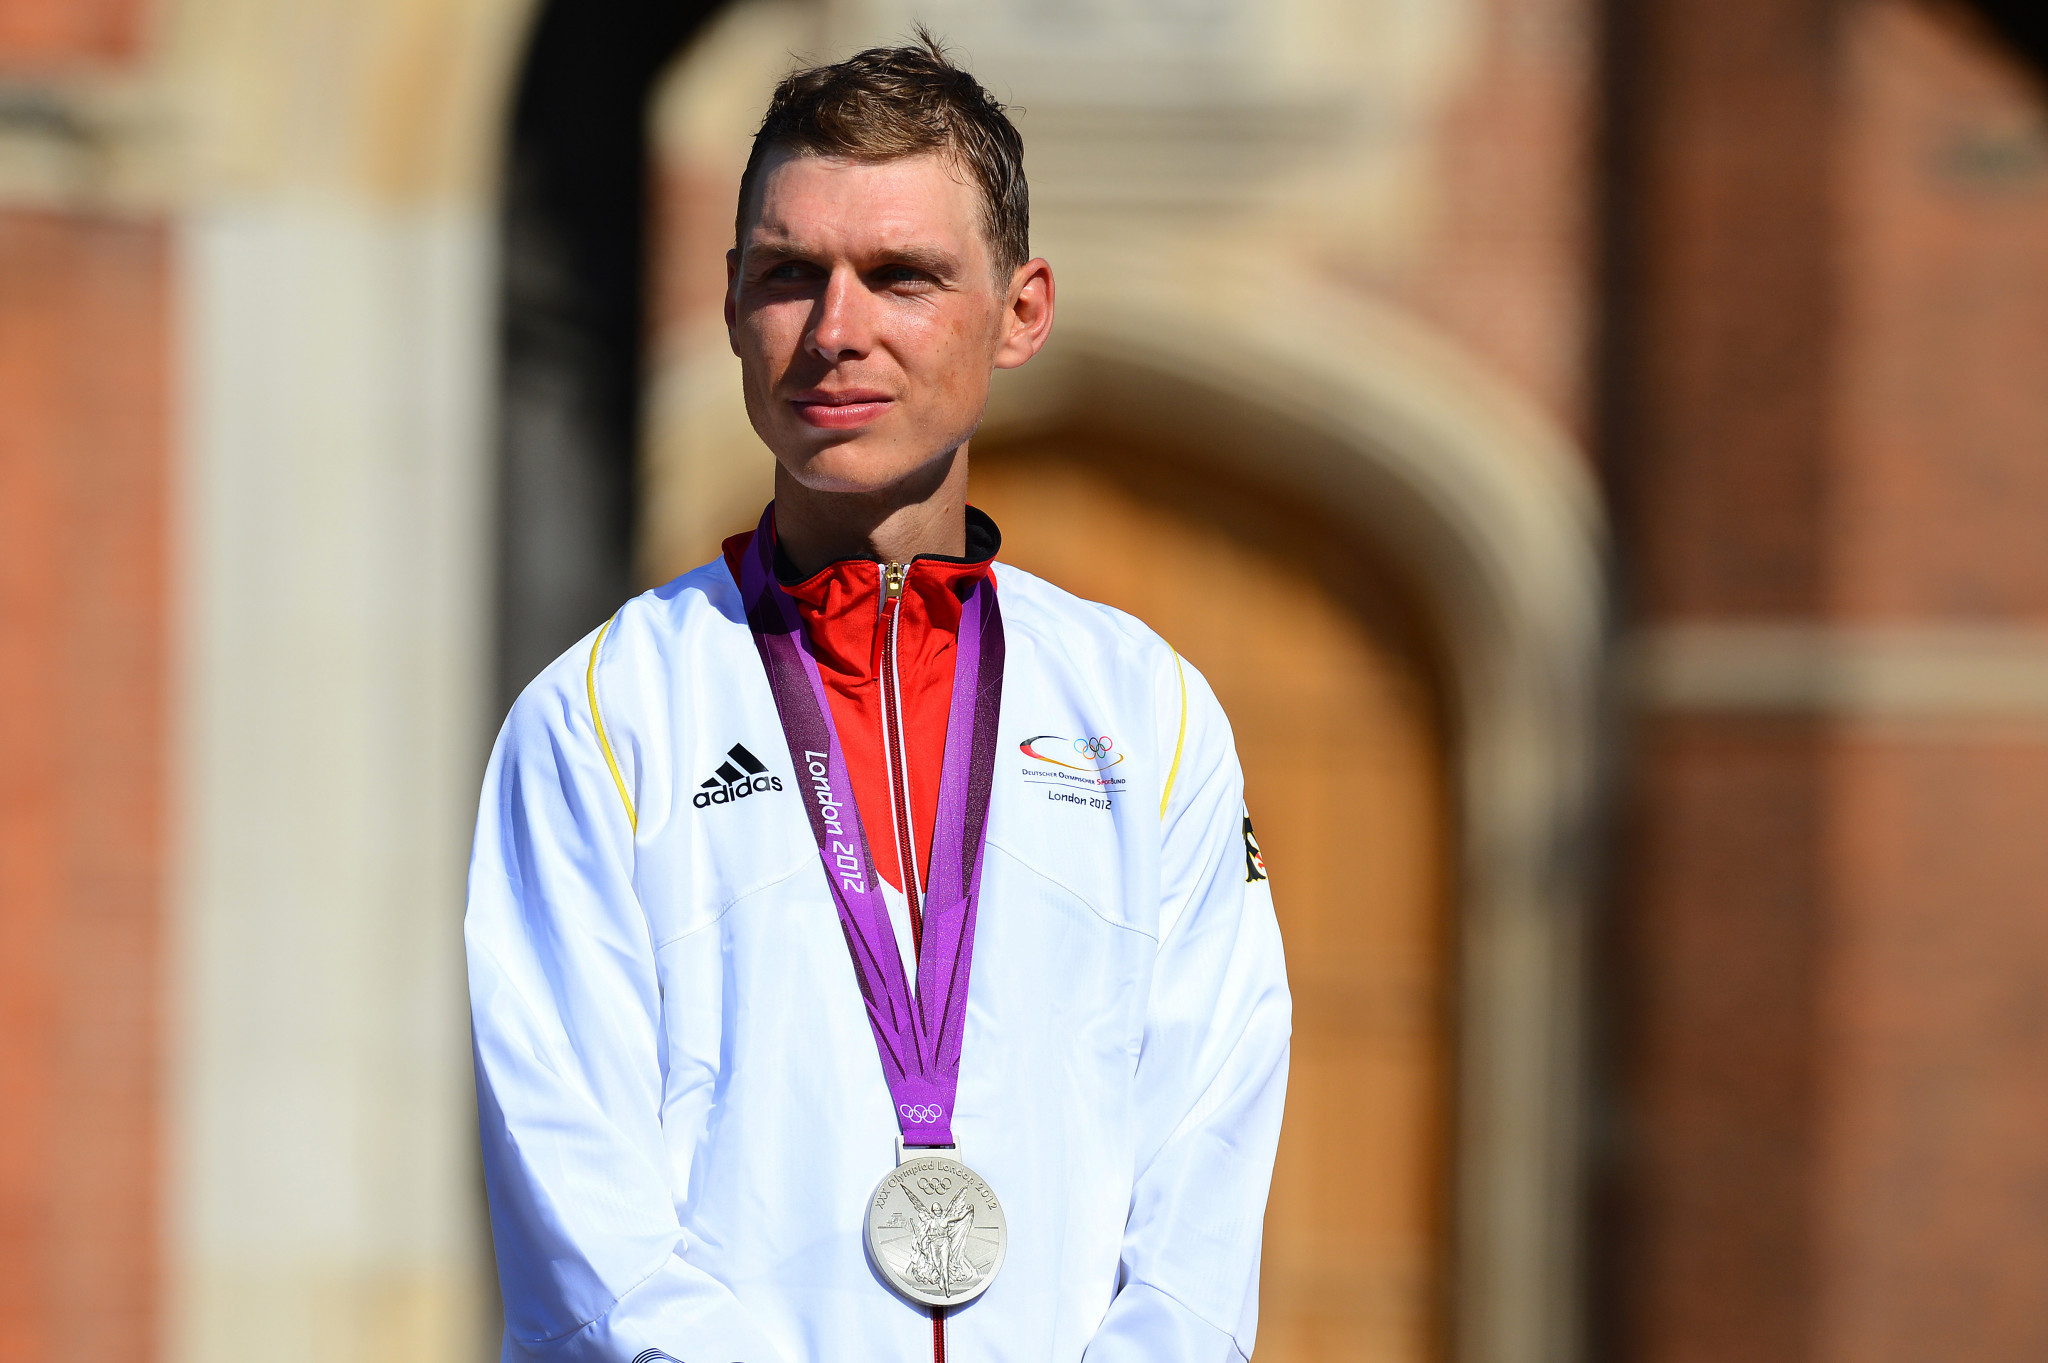 Martin auctions London 2012 silver medal to raise funds for Ukrainian children